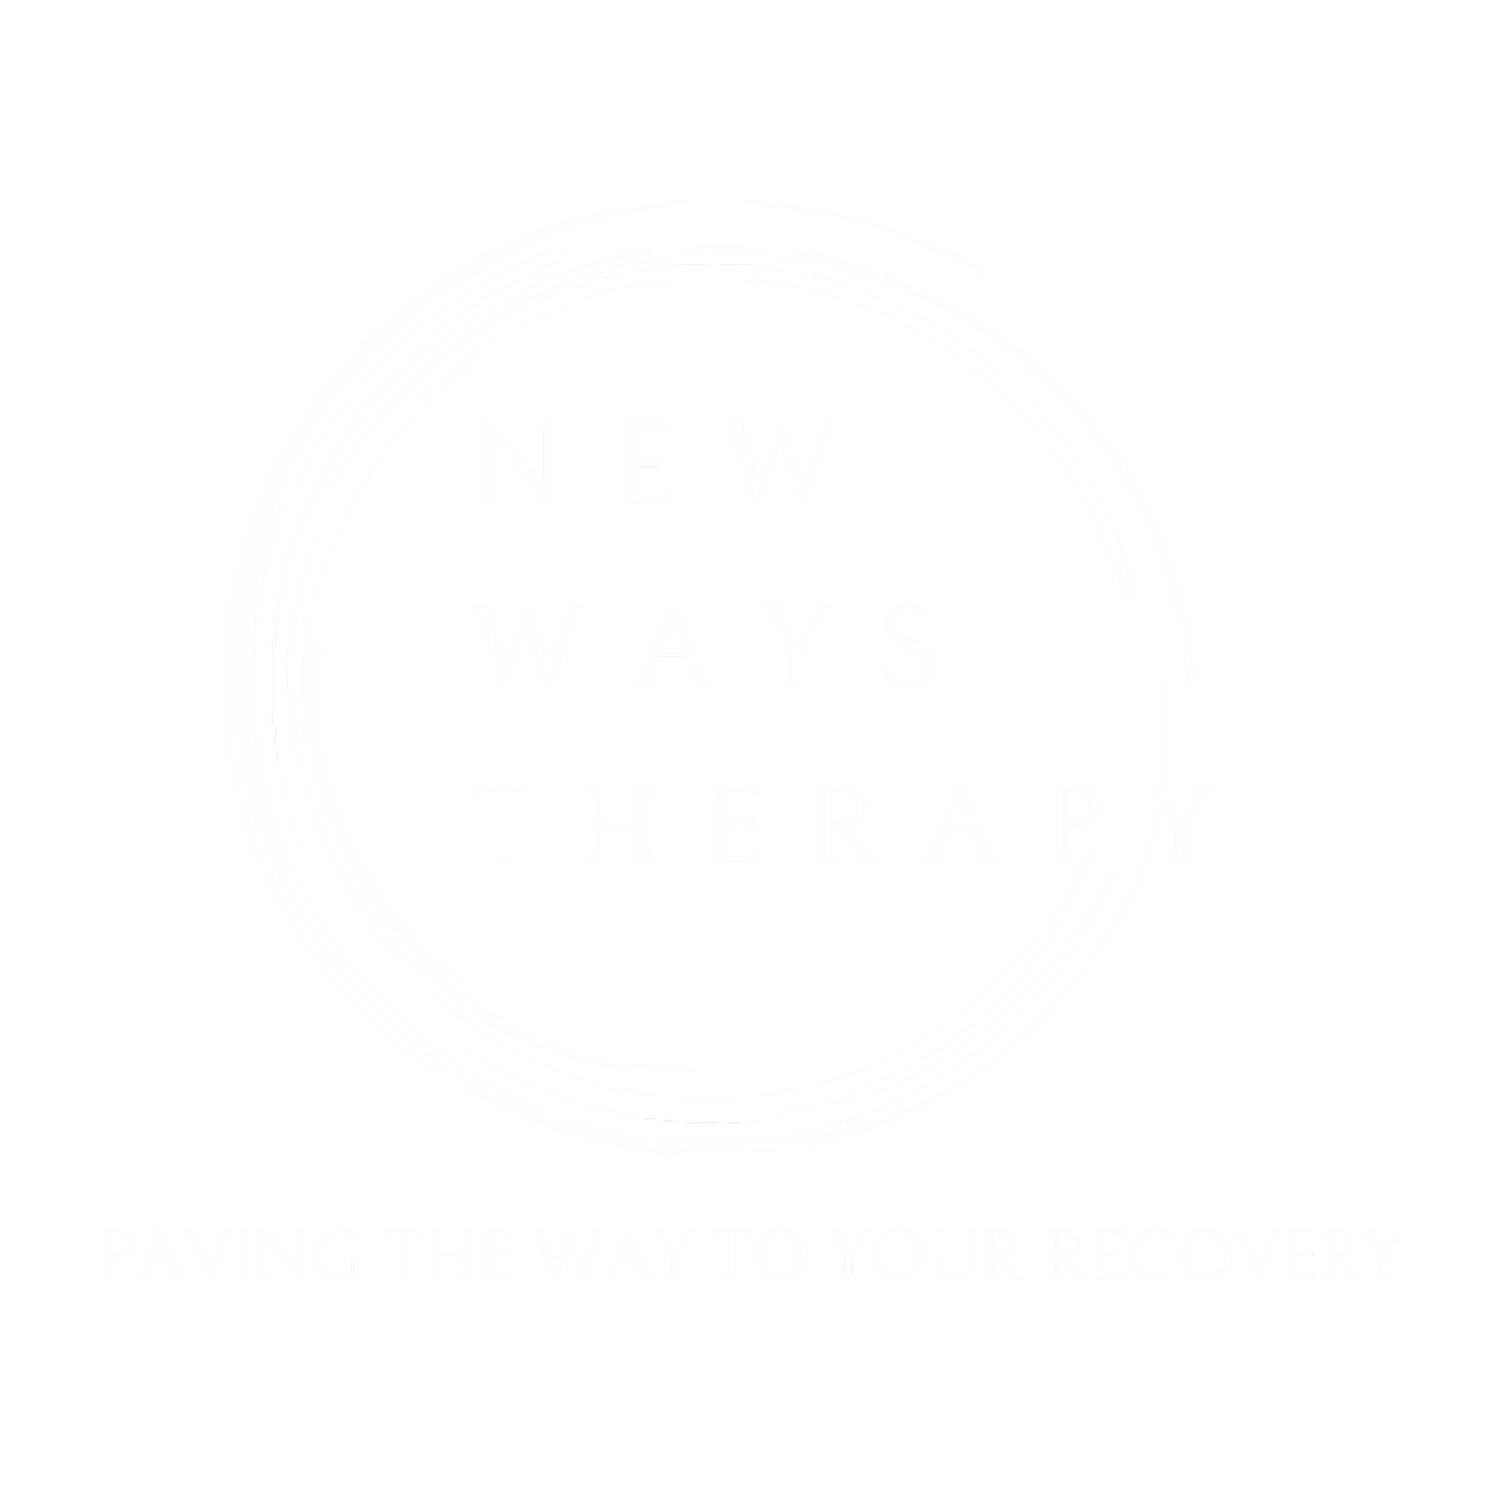 NEW WAYS THERAPY